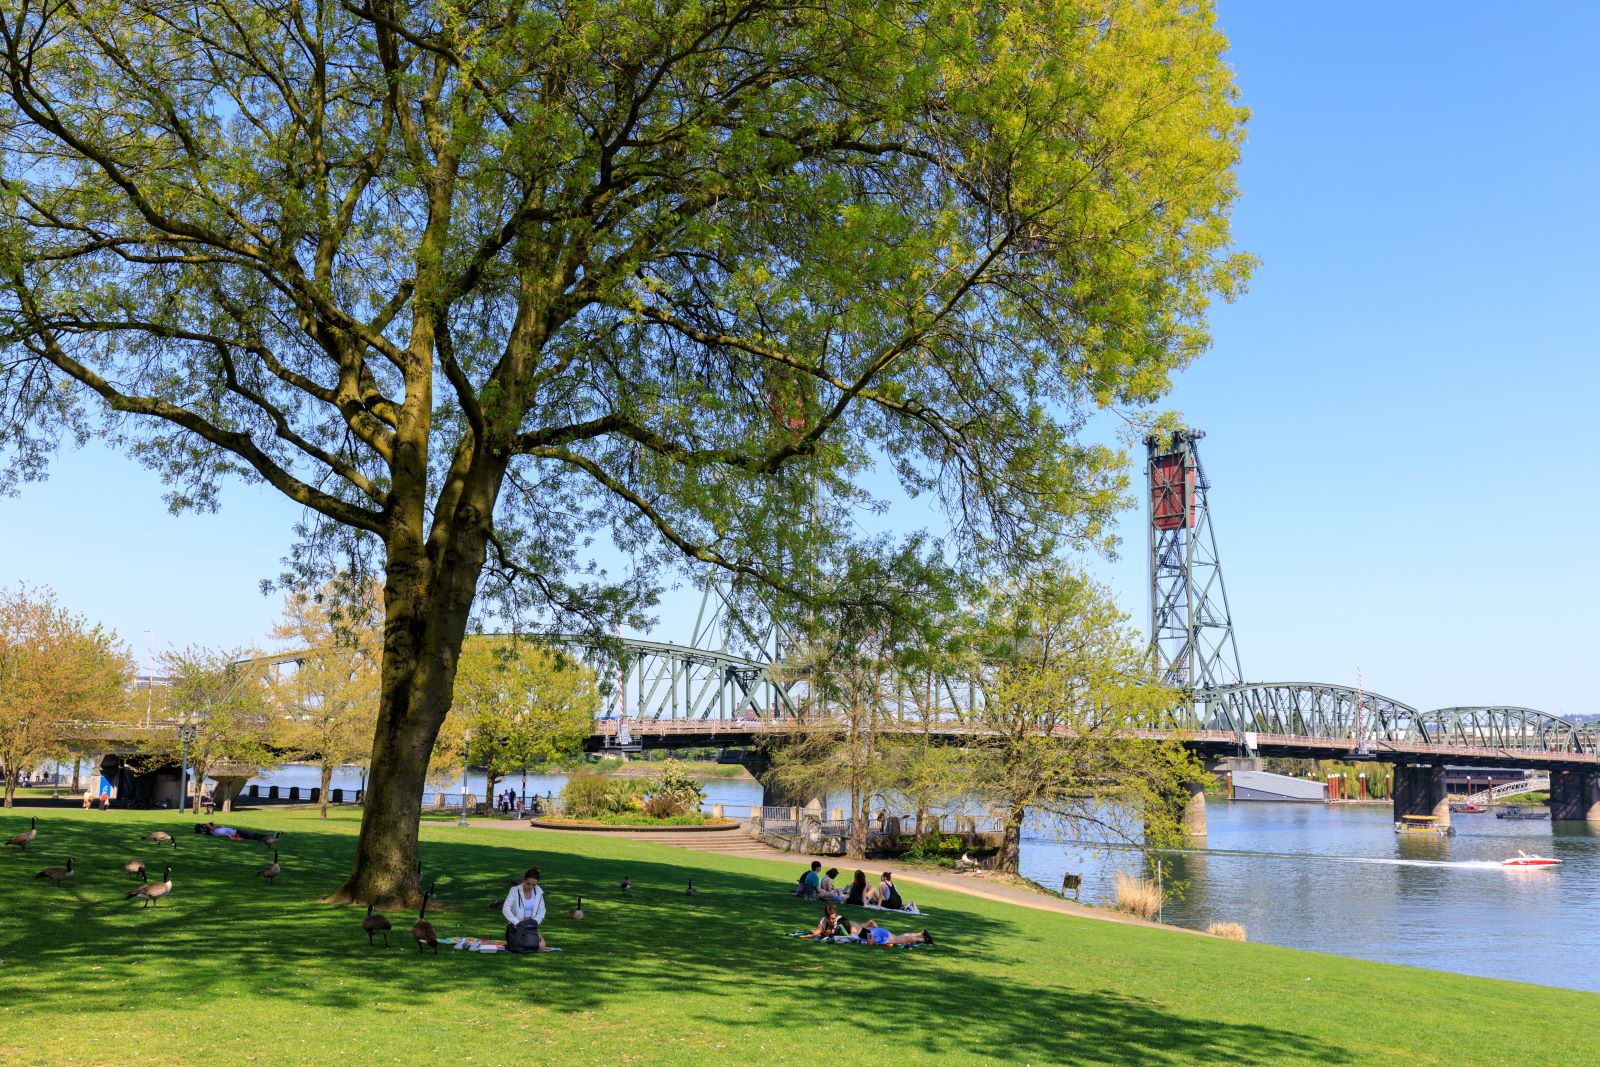 Image credit: Shutterstock / ARTYOORAN <p>Portland is famed for its progressive environmental policies, from expansive bike paths to pioneering waste reduction programs.</p>